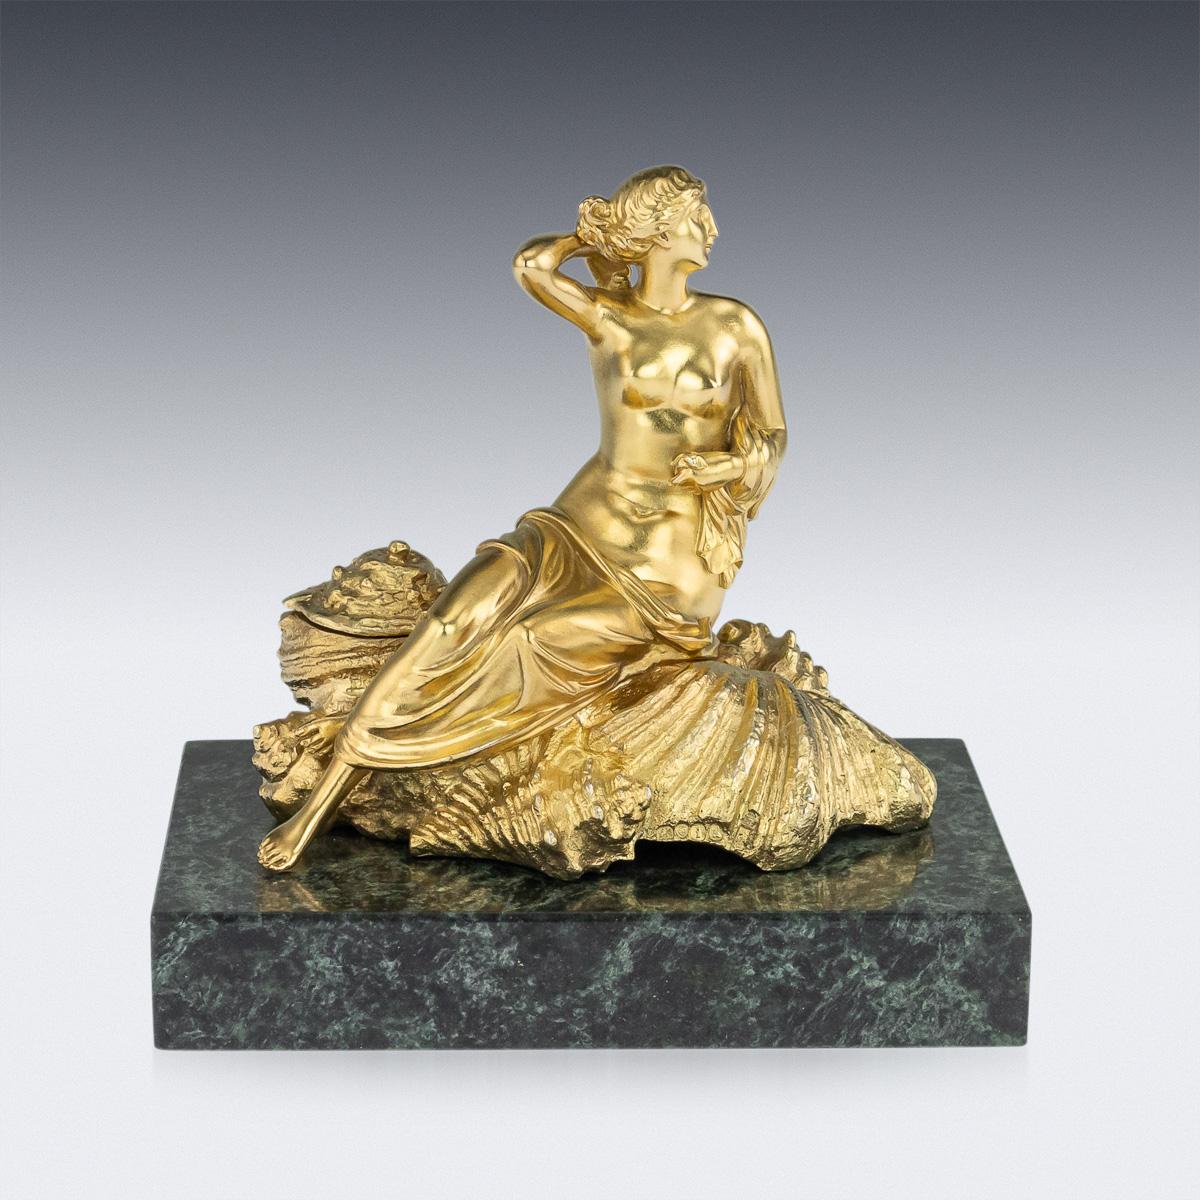 Antique 19th century Georgian solid silver-gilt on green marble inkwell depicting the birth of Venus (Aphrodite). Reclining and bare chested on a mount of shells, with one shell applied with a hinged lid, revealing an inkwell